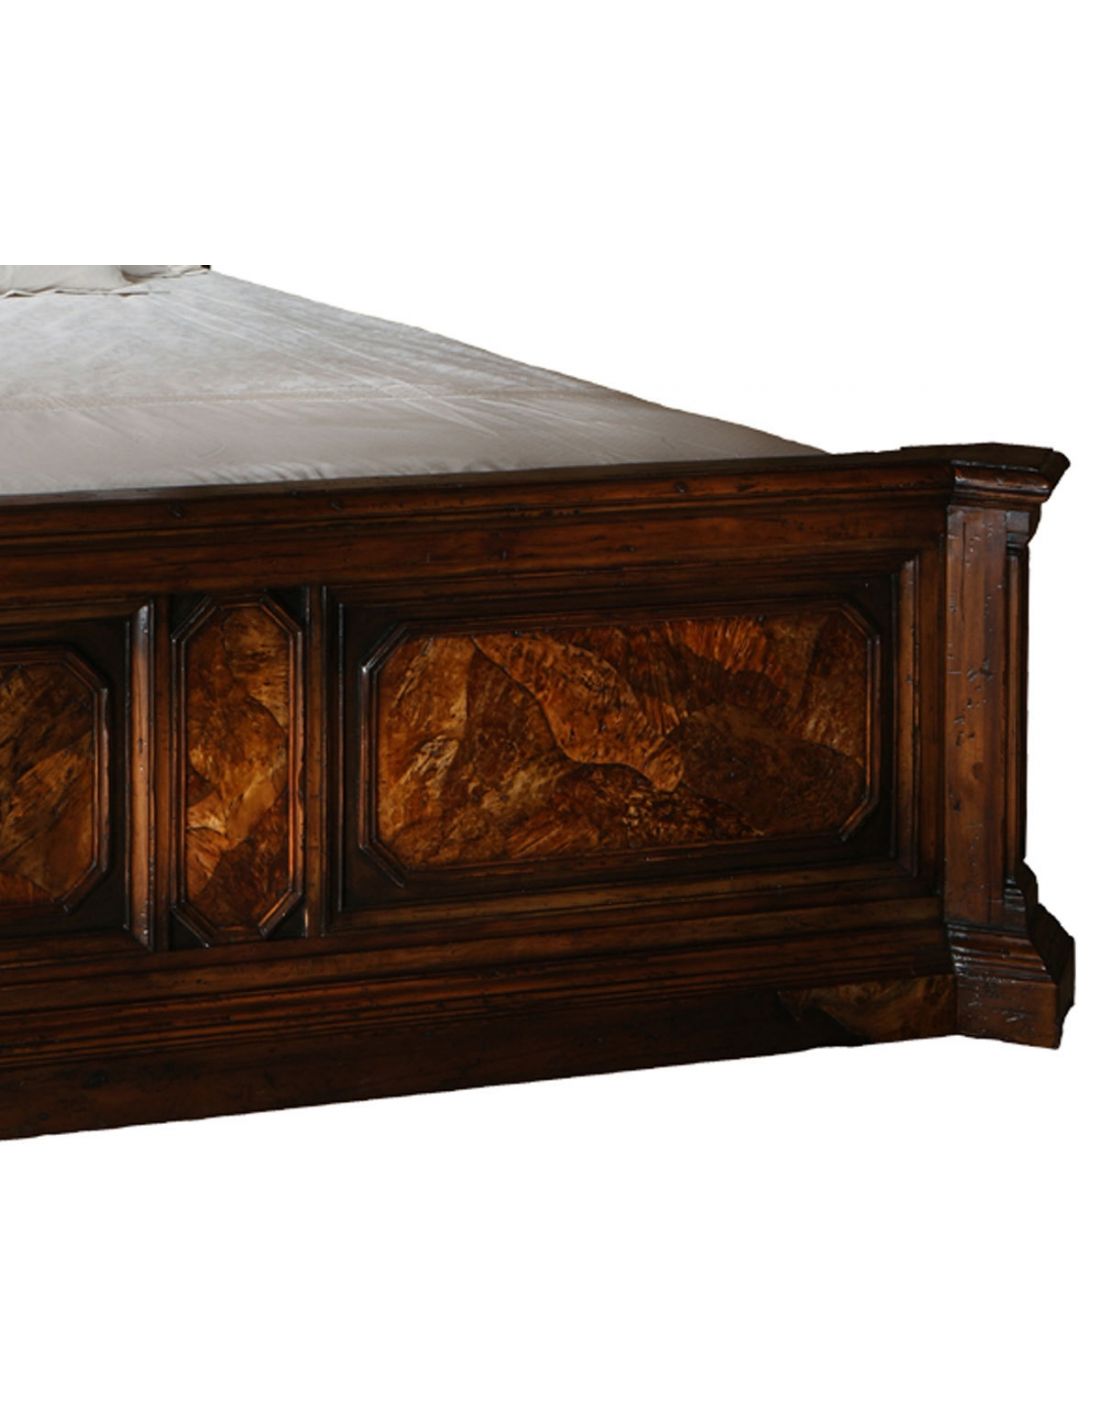 Our Love for Burl Wood Furniture Has Been Reignited